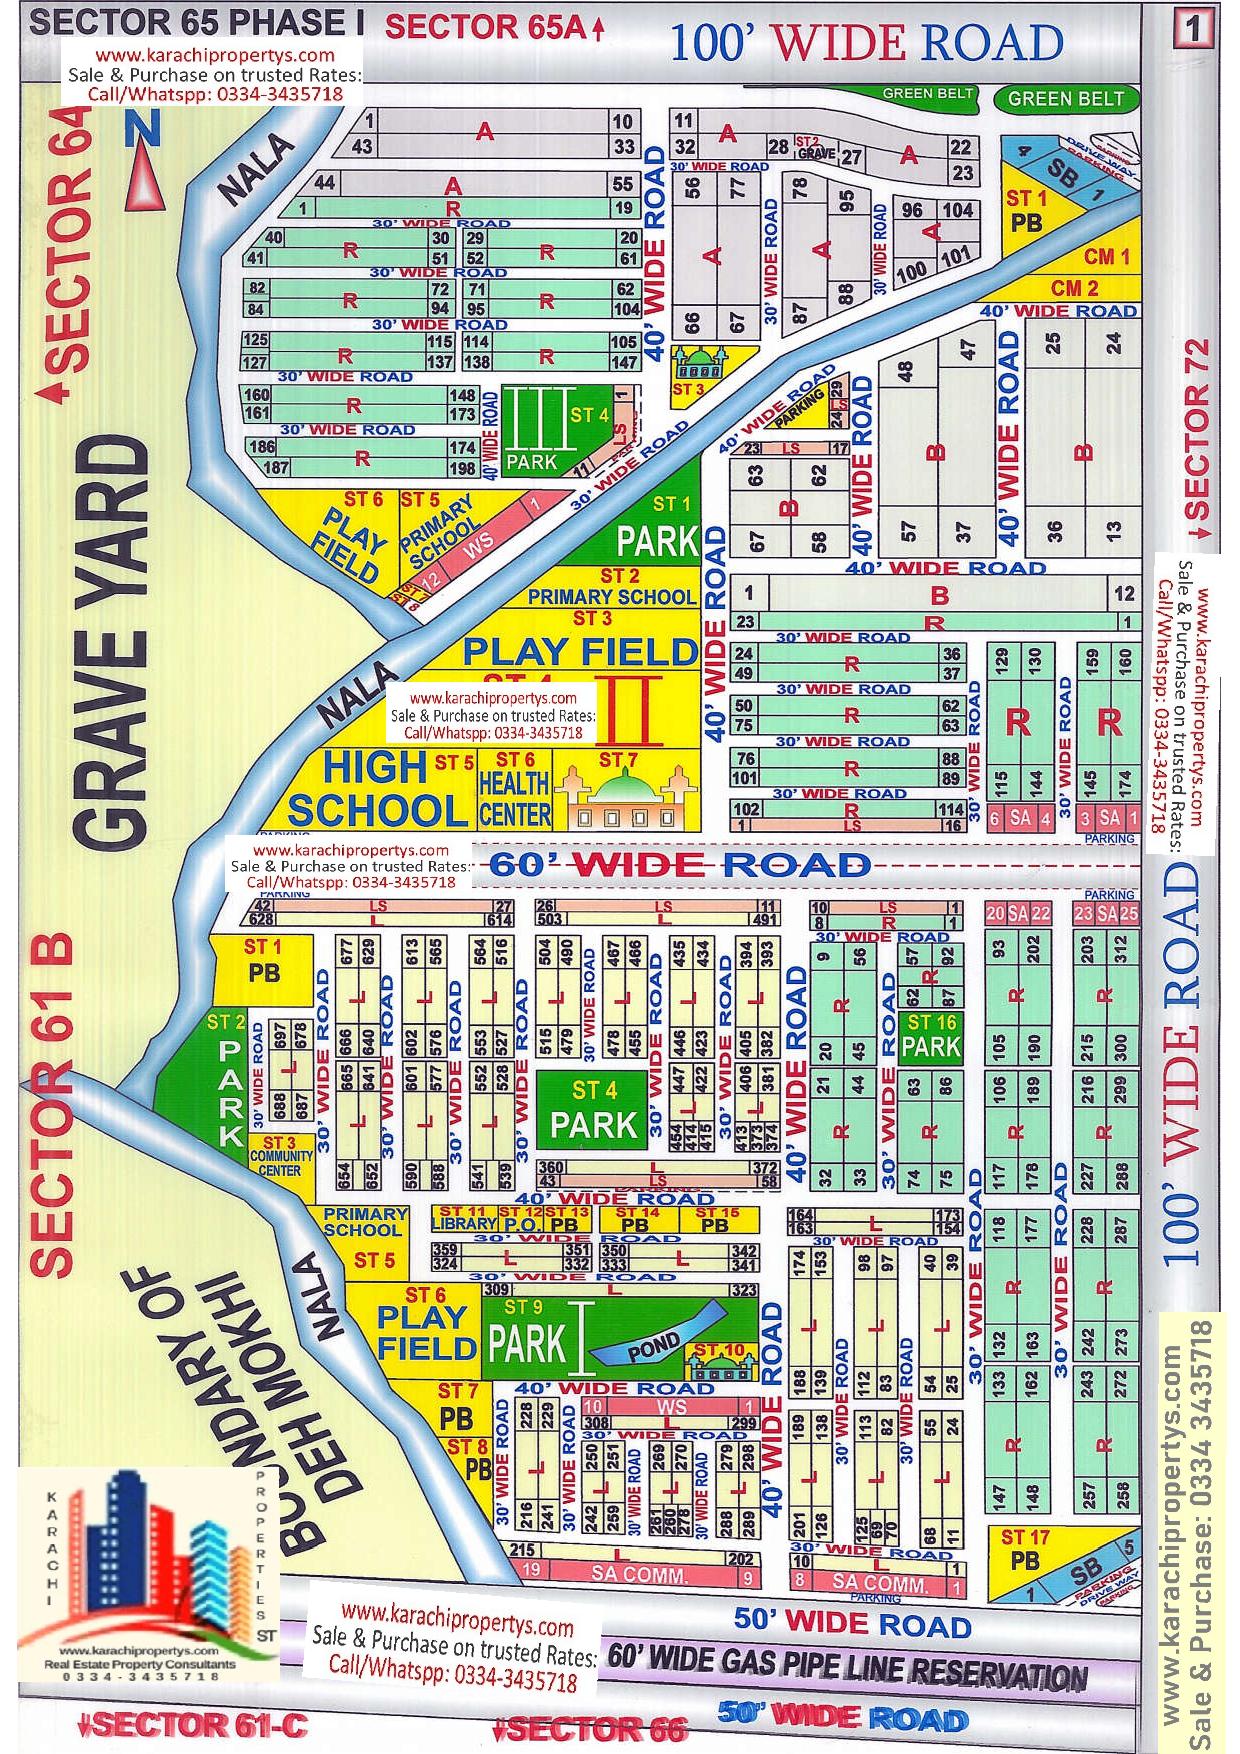 Taiser-Town-latest-map-Sector-65-Phase-1